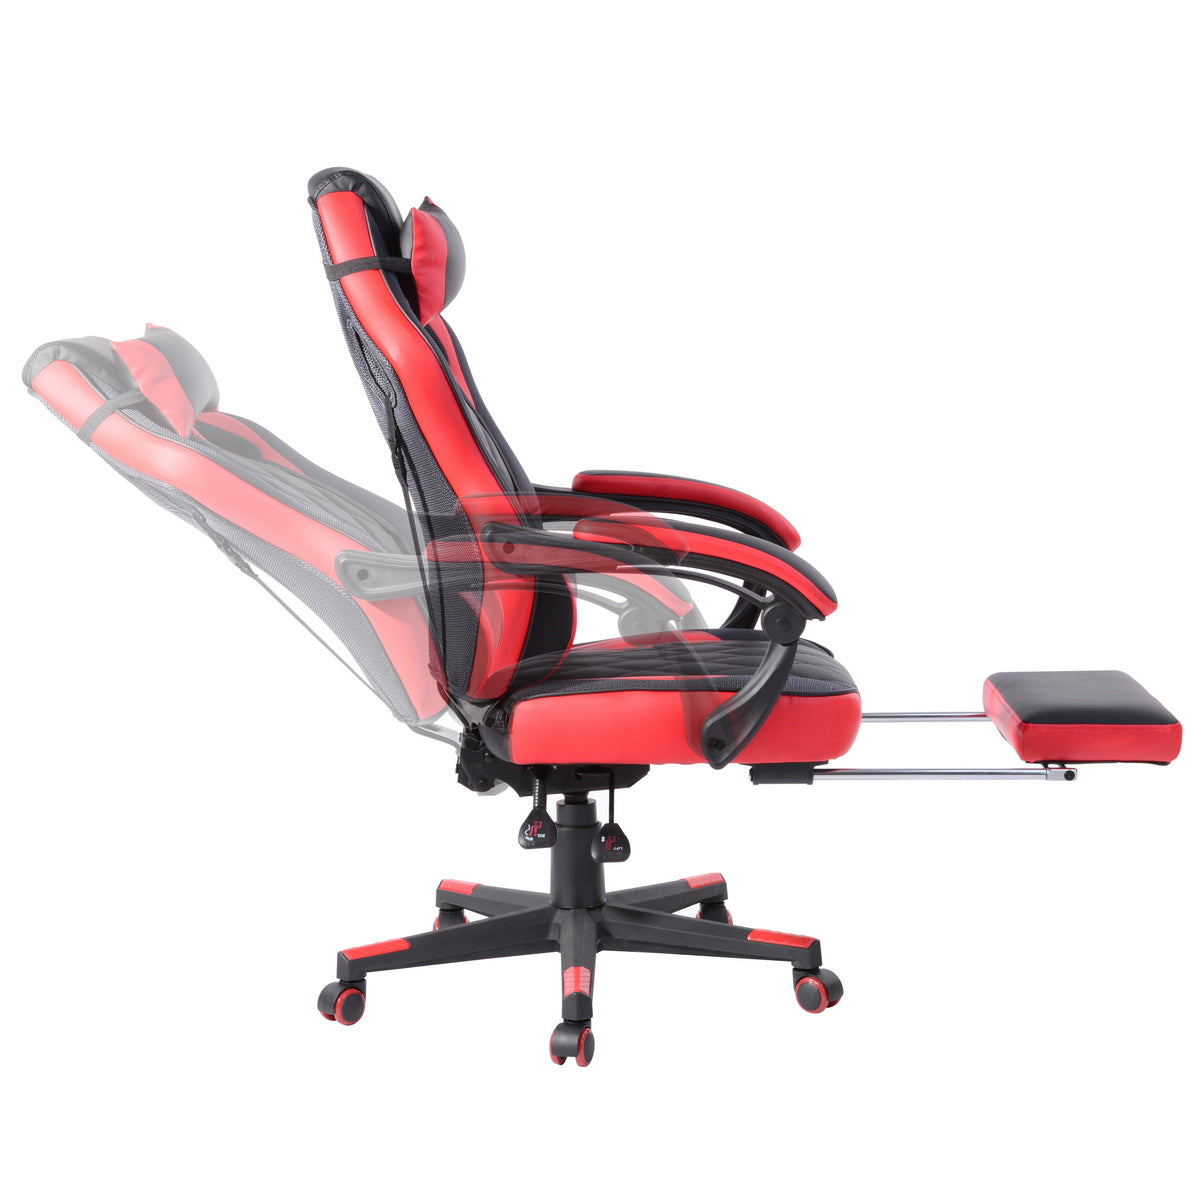 Upholstery PU Foldable Armrest Gaming Chair With Padded Handles with Butterfly Seat, Burgendy Red